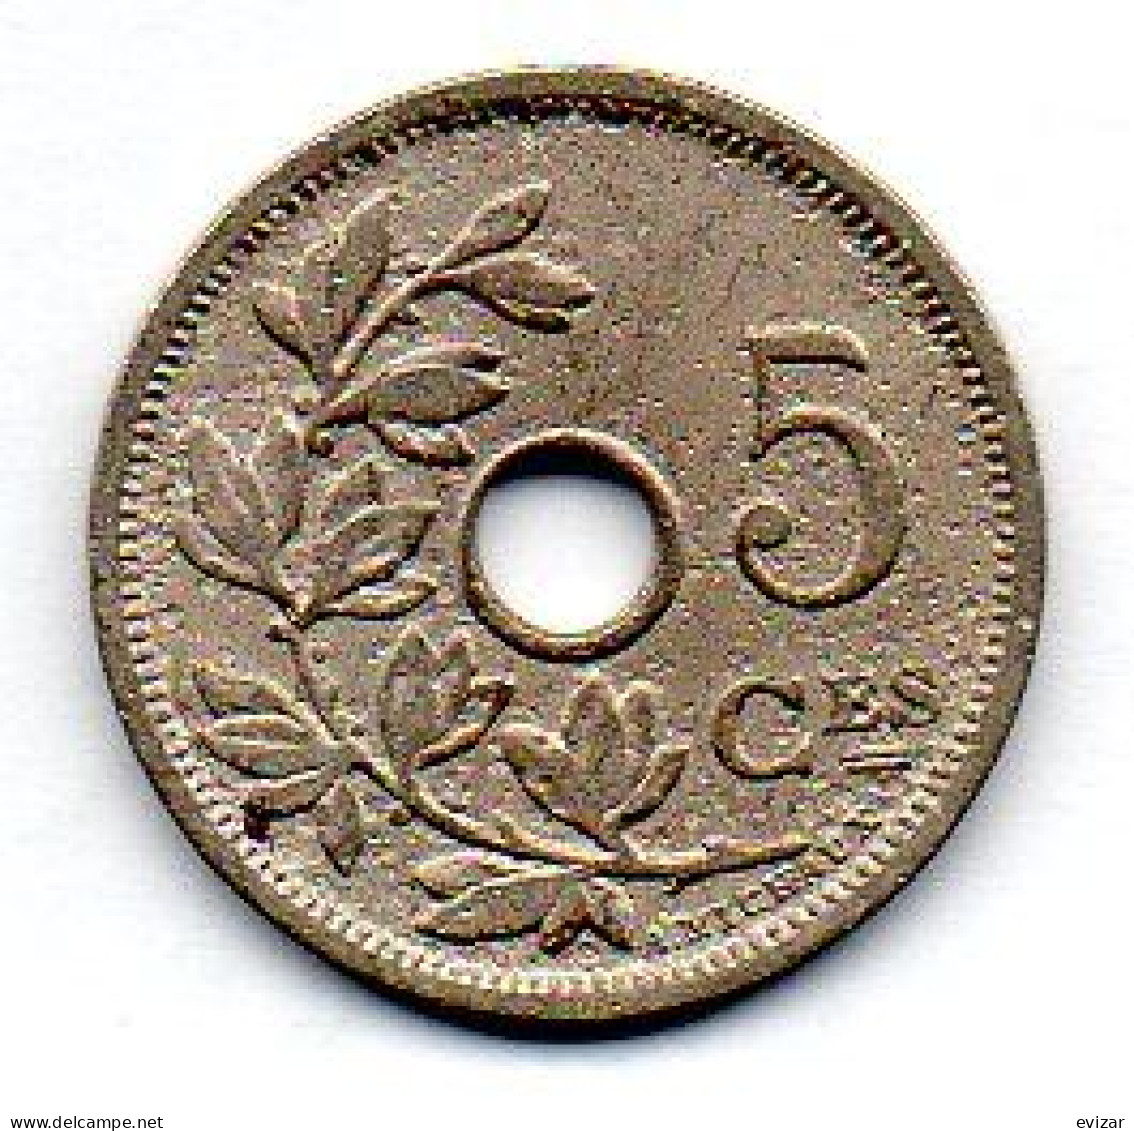 BELGIUM, 5 Centimes, Copper-Nickel, Year 1902, KM # 46, French Legend - 5 Centimes